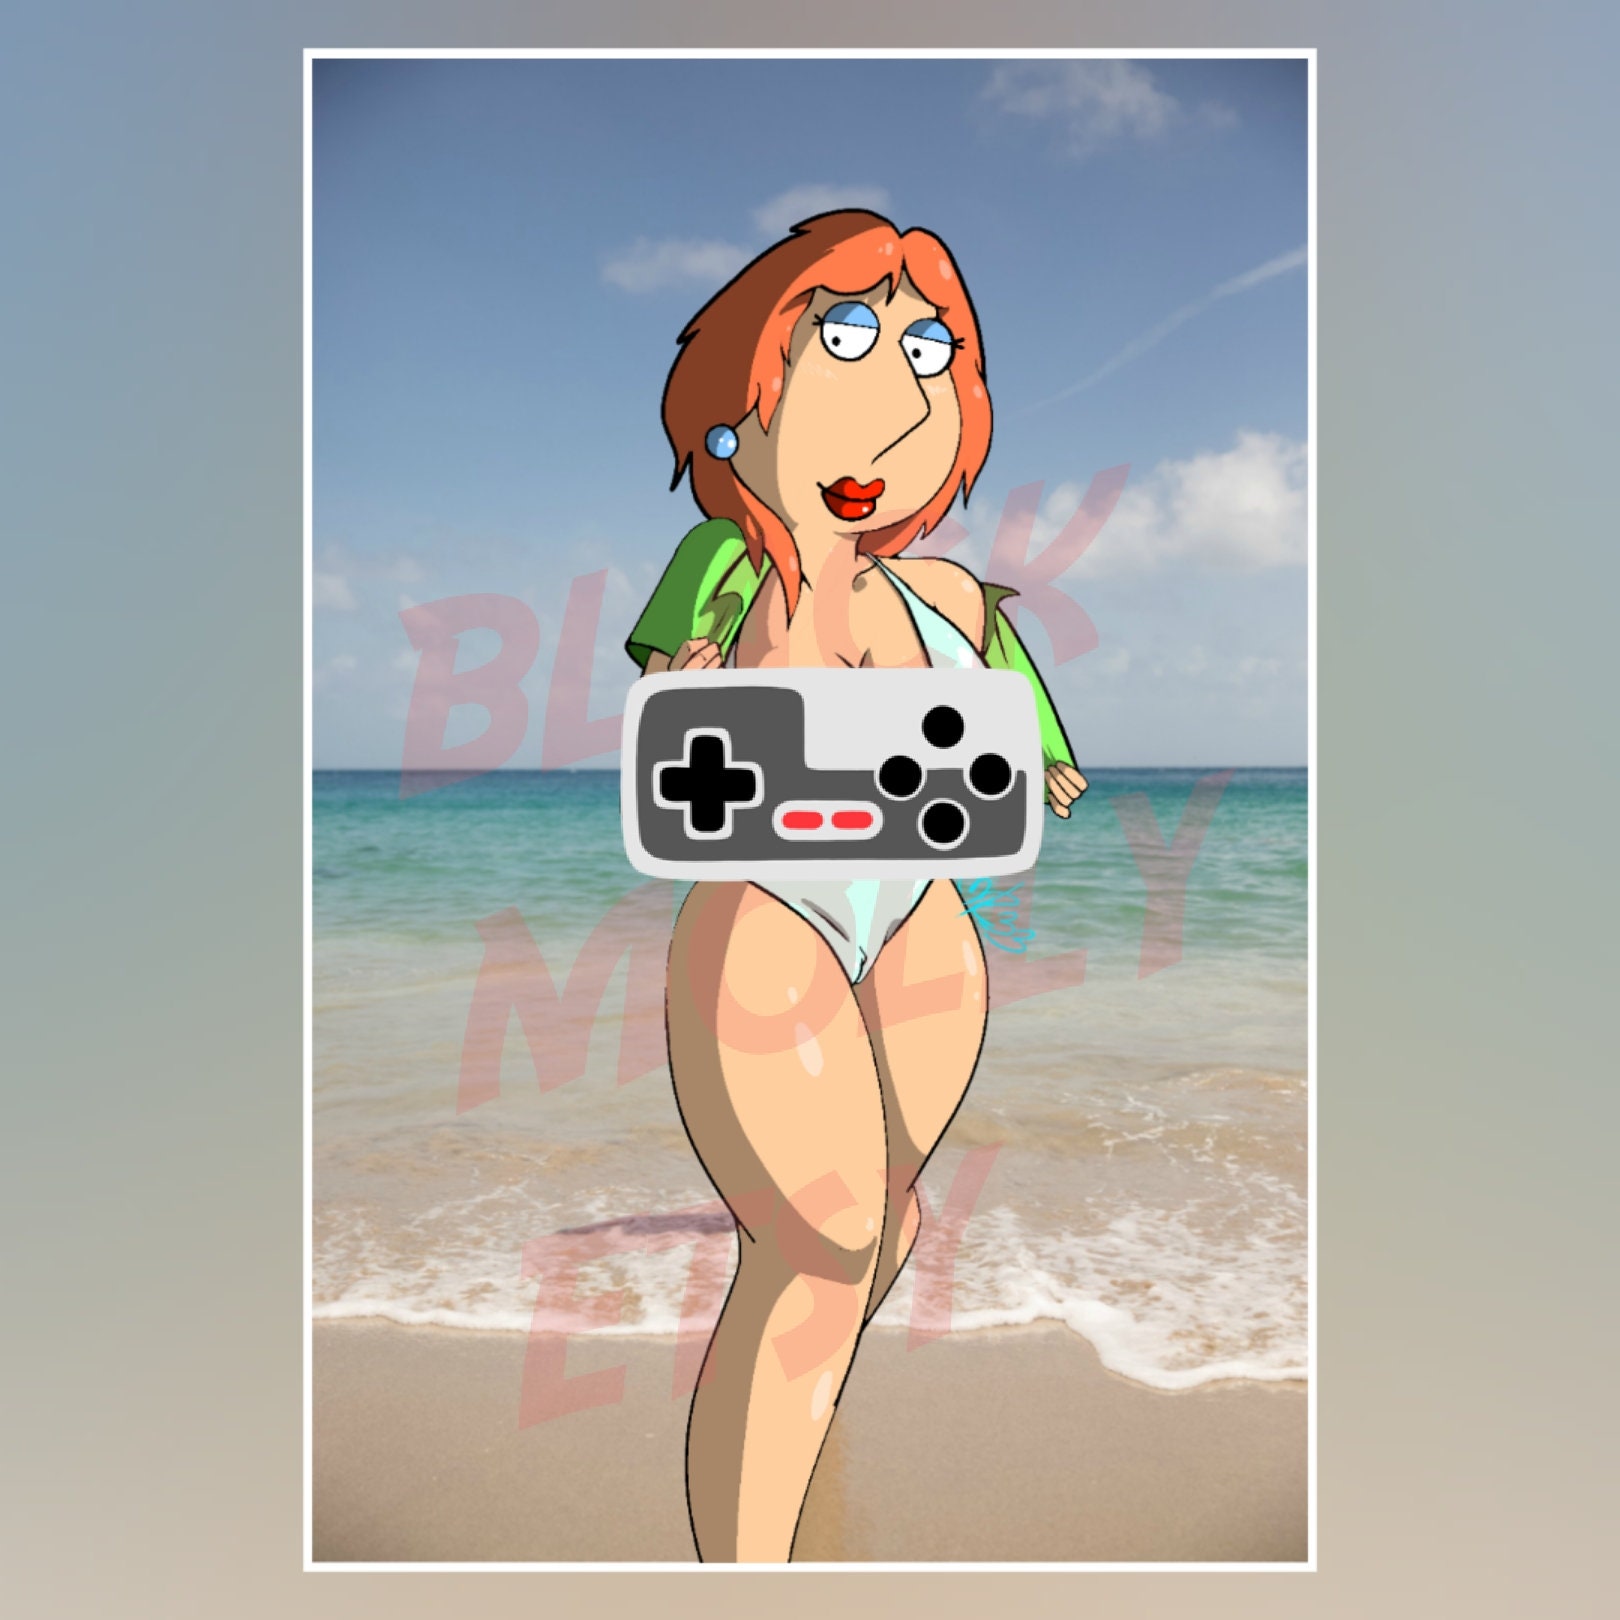 Mature Lois Griffin Topless Family Guy Nude Fan Art Fashion photo pic